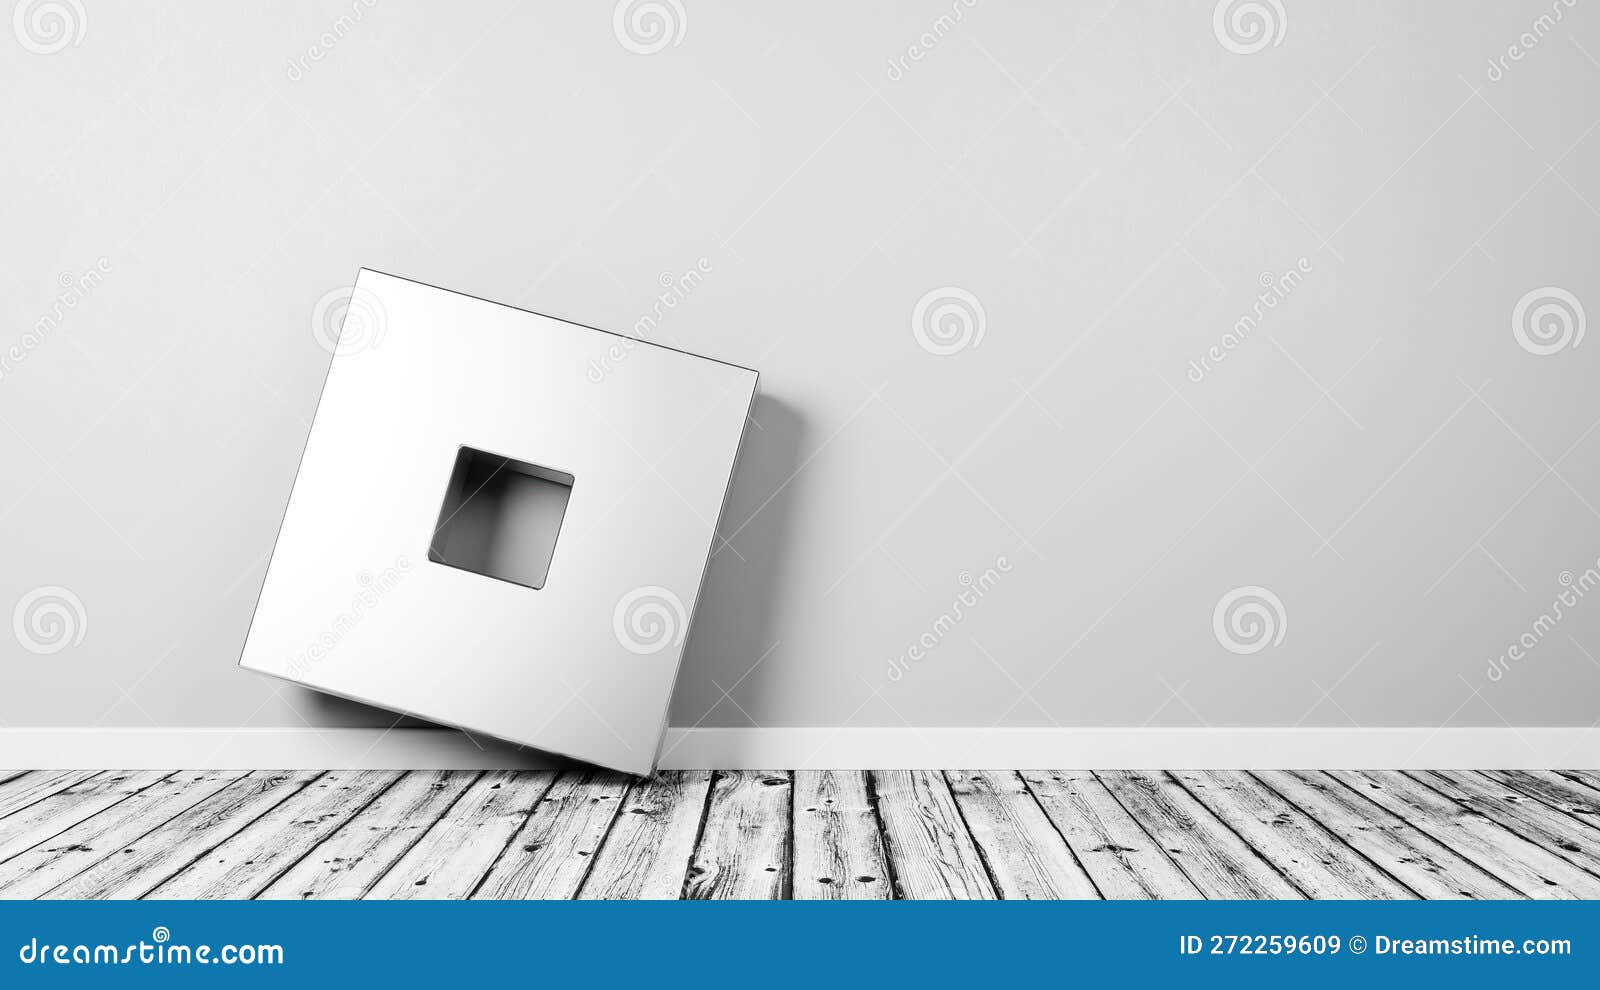 Roblox Logo on Wooden Floor Against Wall Editorial Stock Image -  Illustration of space, plank: 272259609